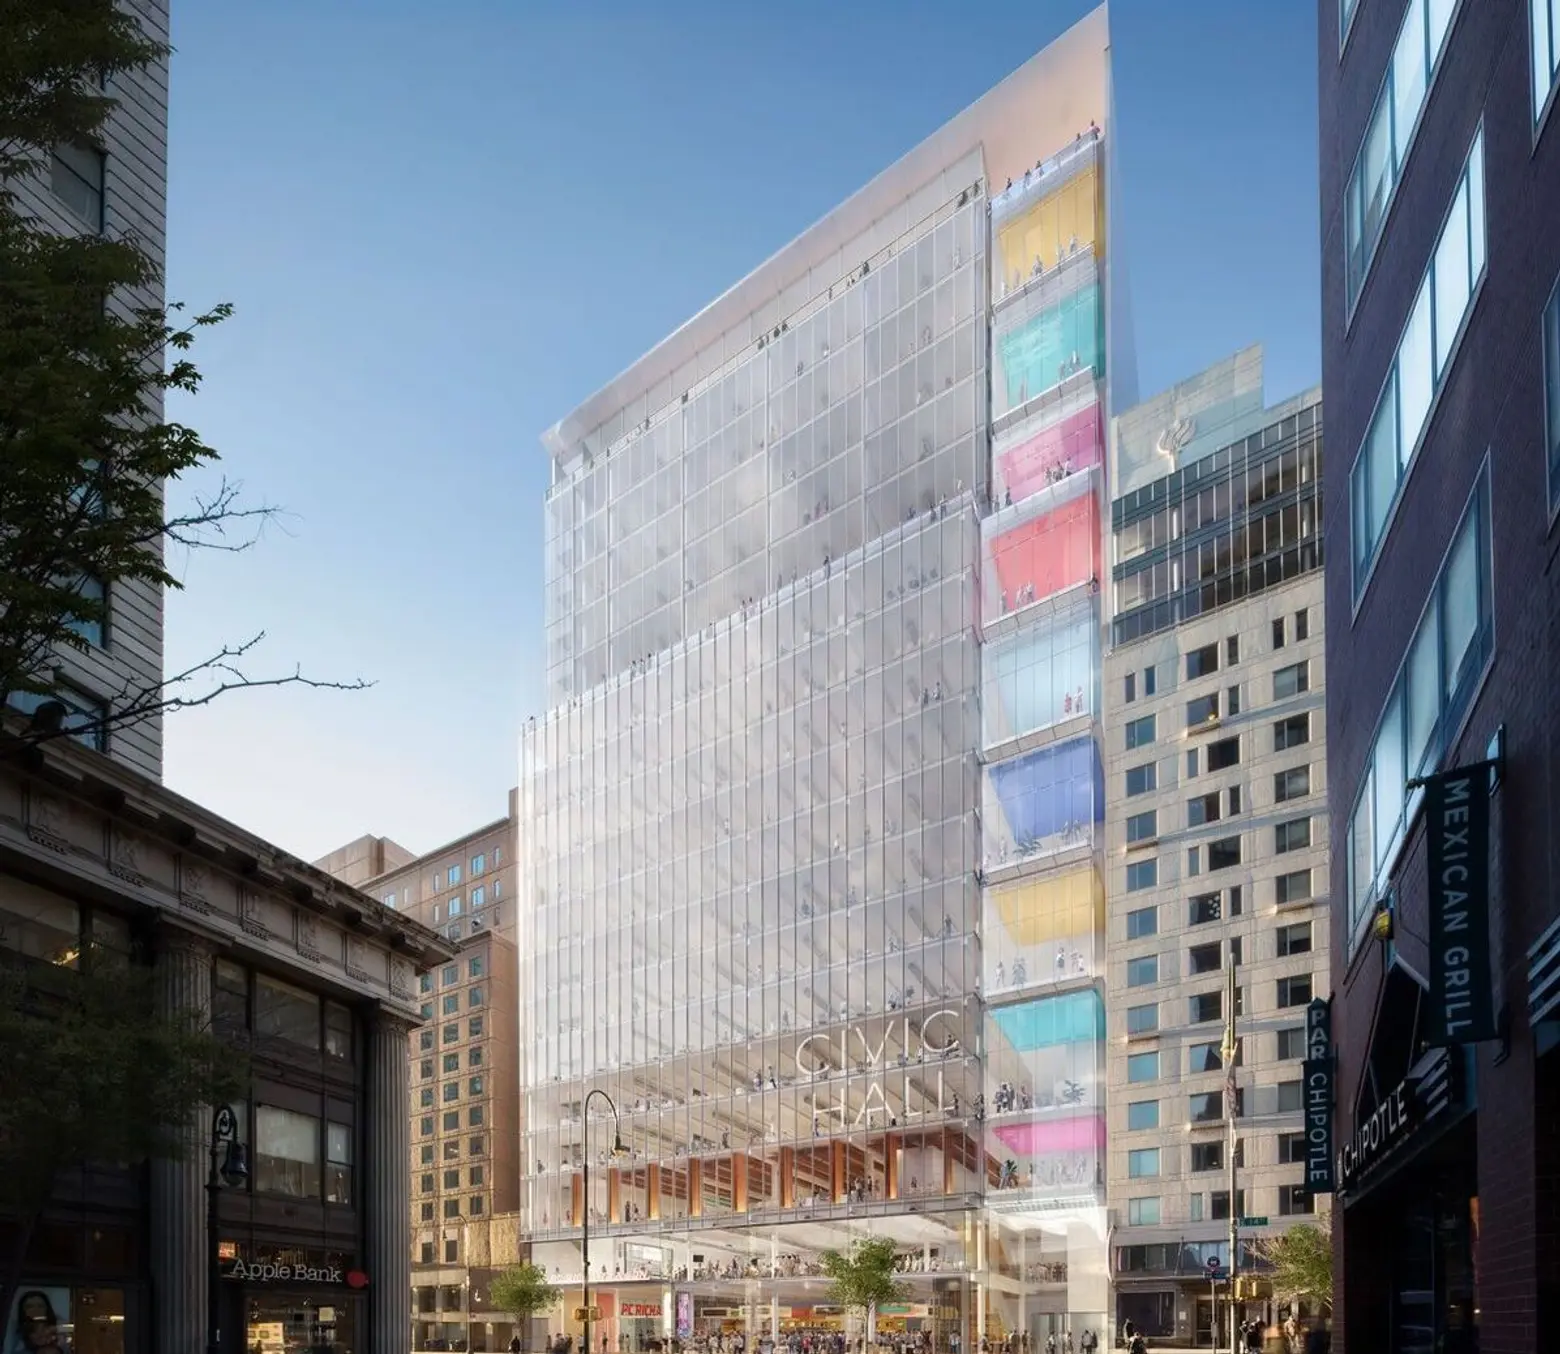 21-story Union Square tech hub gets green light from City Council despite community concerns